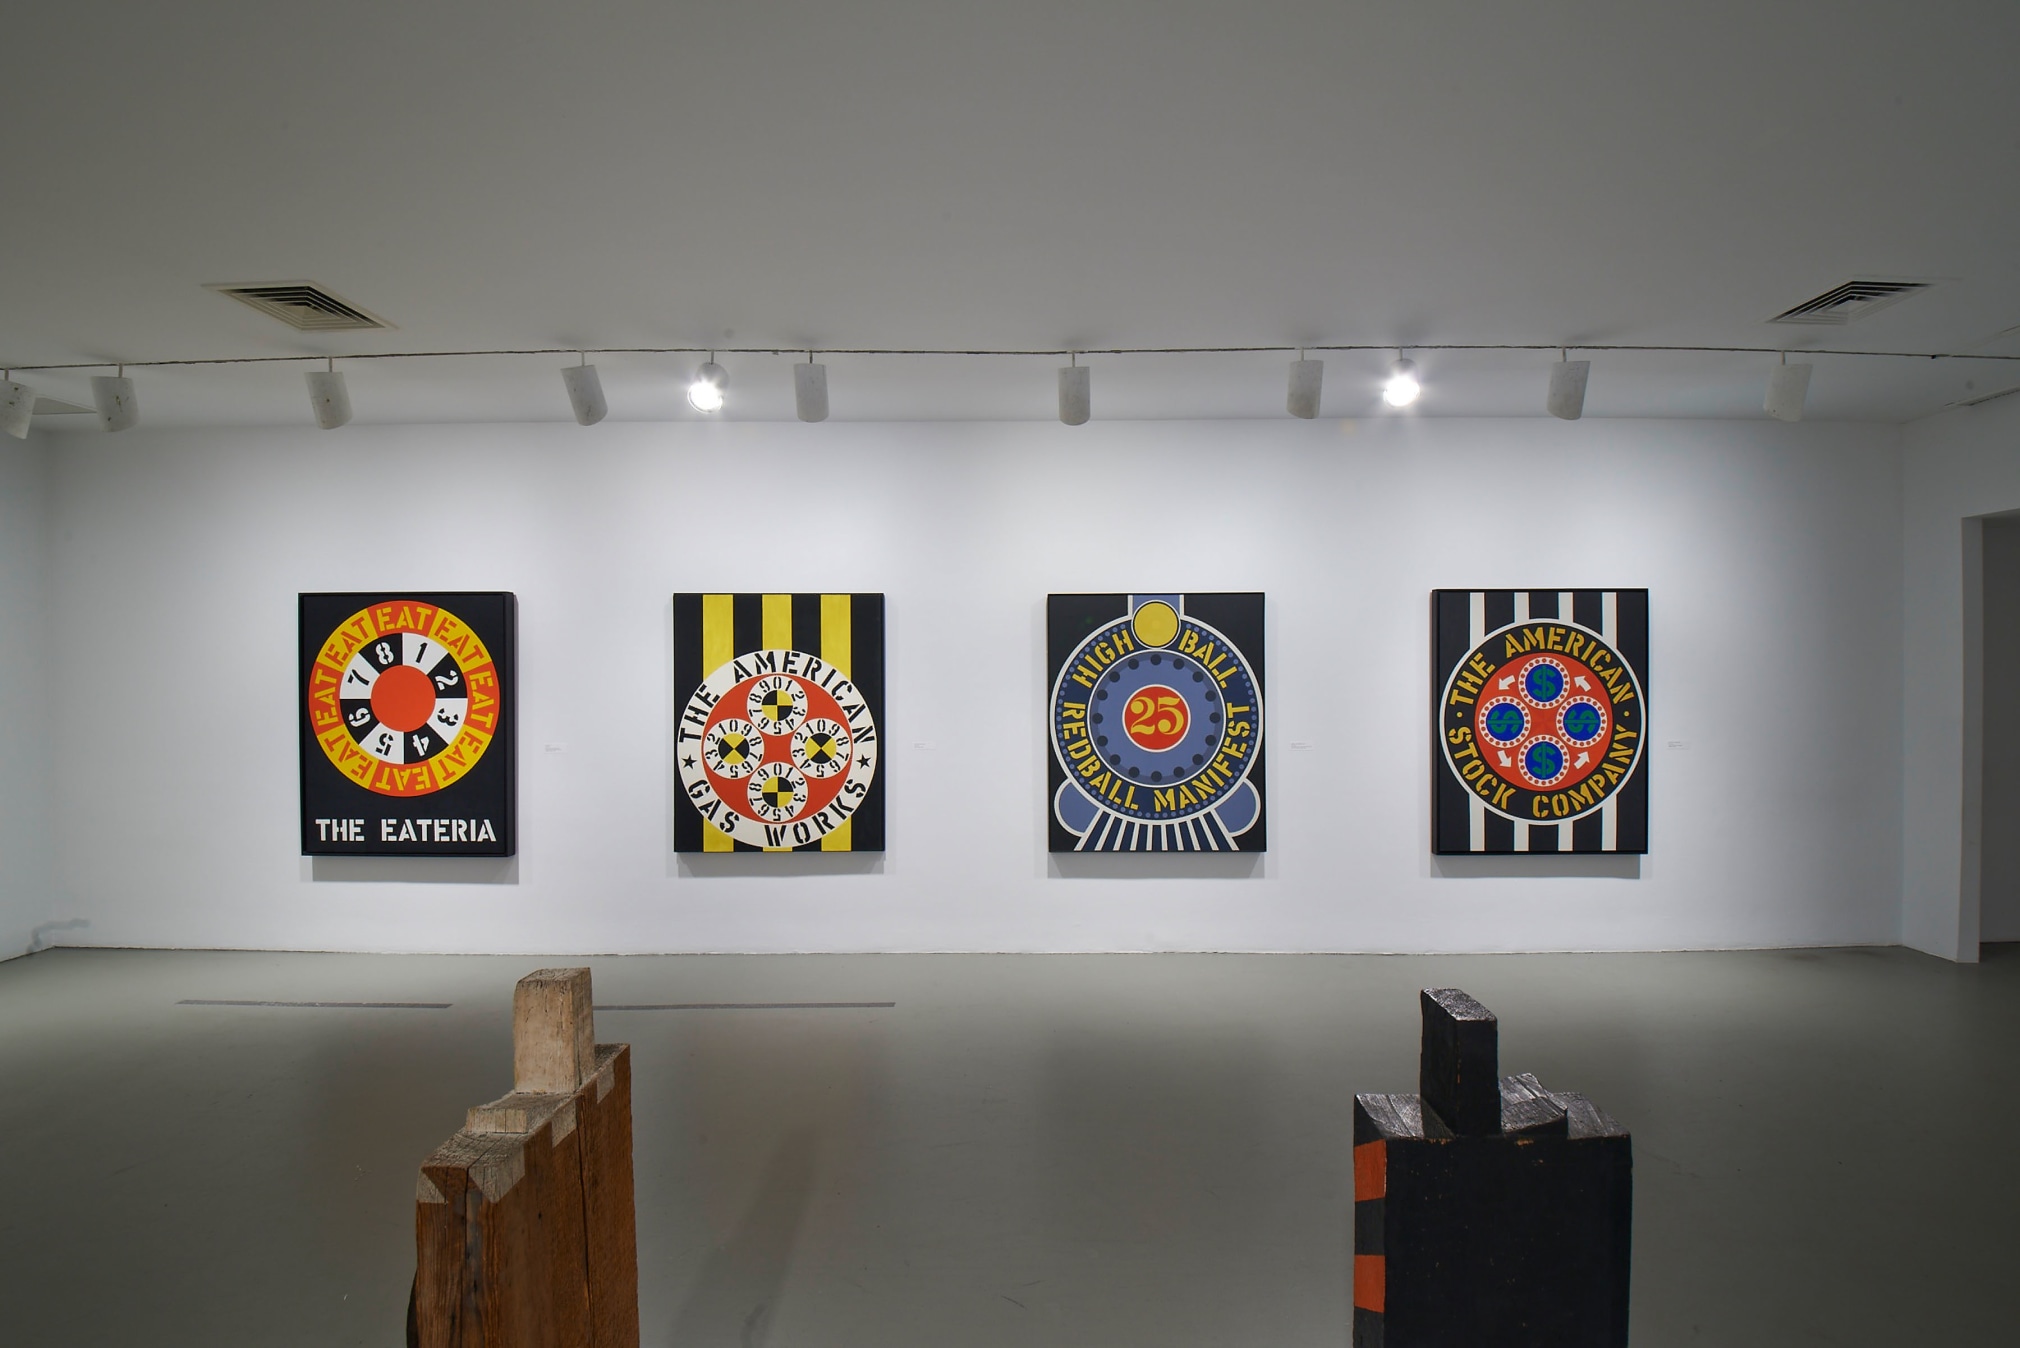 Installation view of Robert Indiana: Beyond LOVE, Whitney Museum of American Art, New York, September 26, 2013&ndash;January 5, 2014. Left to right, The Eateria (1962), The American Gas Works (1961&ndash;62), Highball on the Redball Manifest (1963), and The American Stock Company (1963), &nbsp;